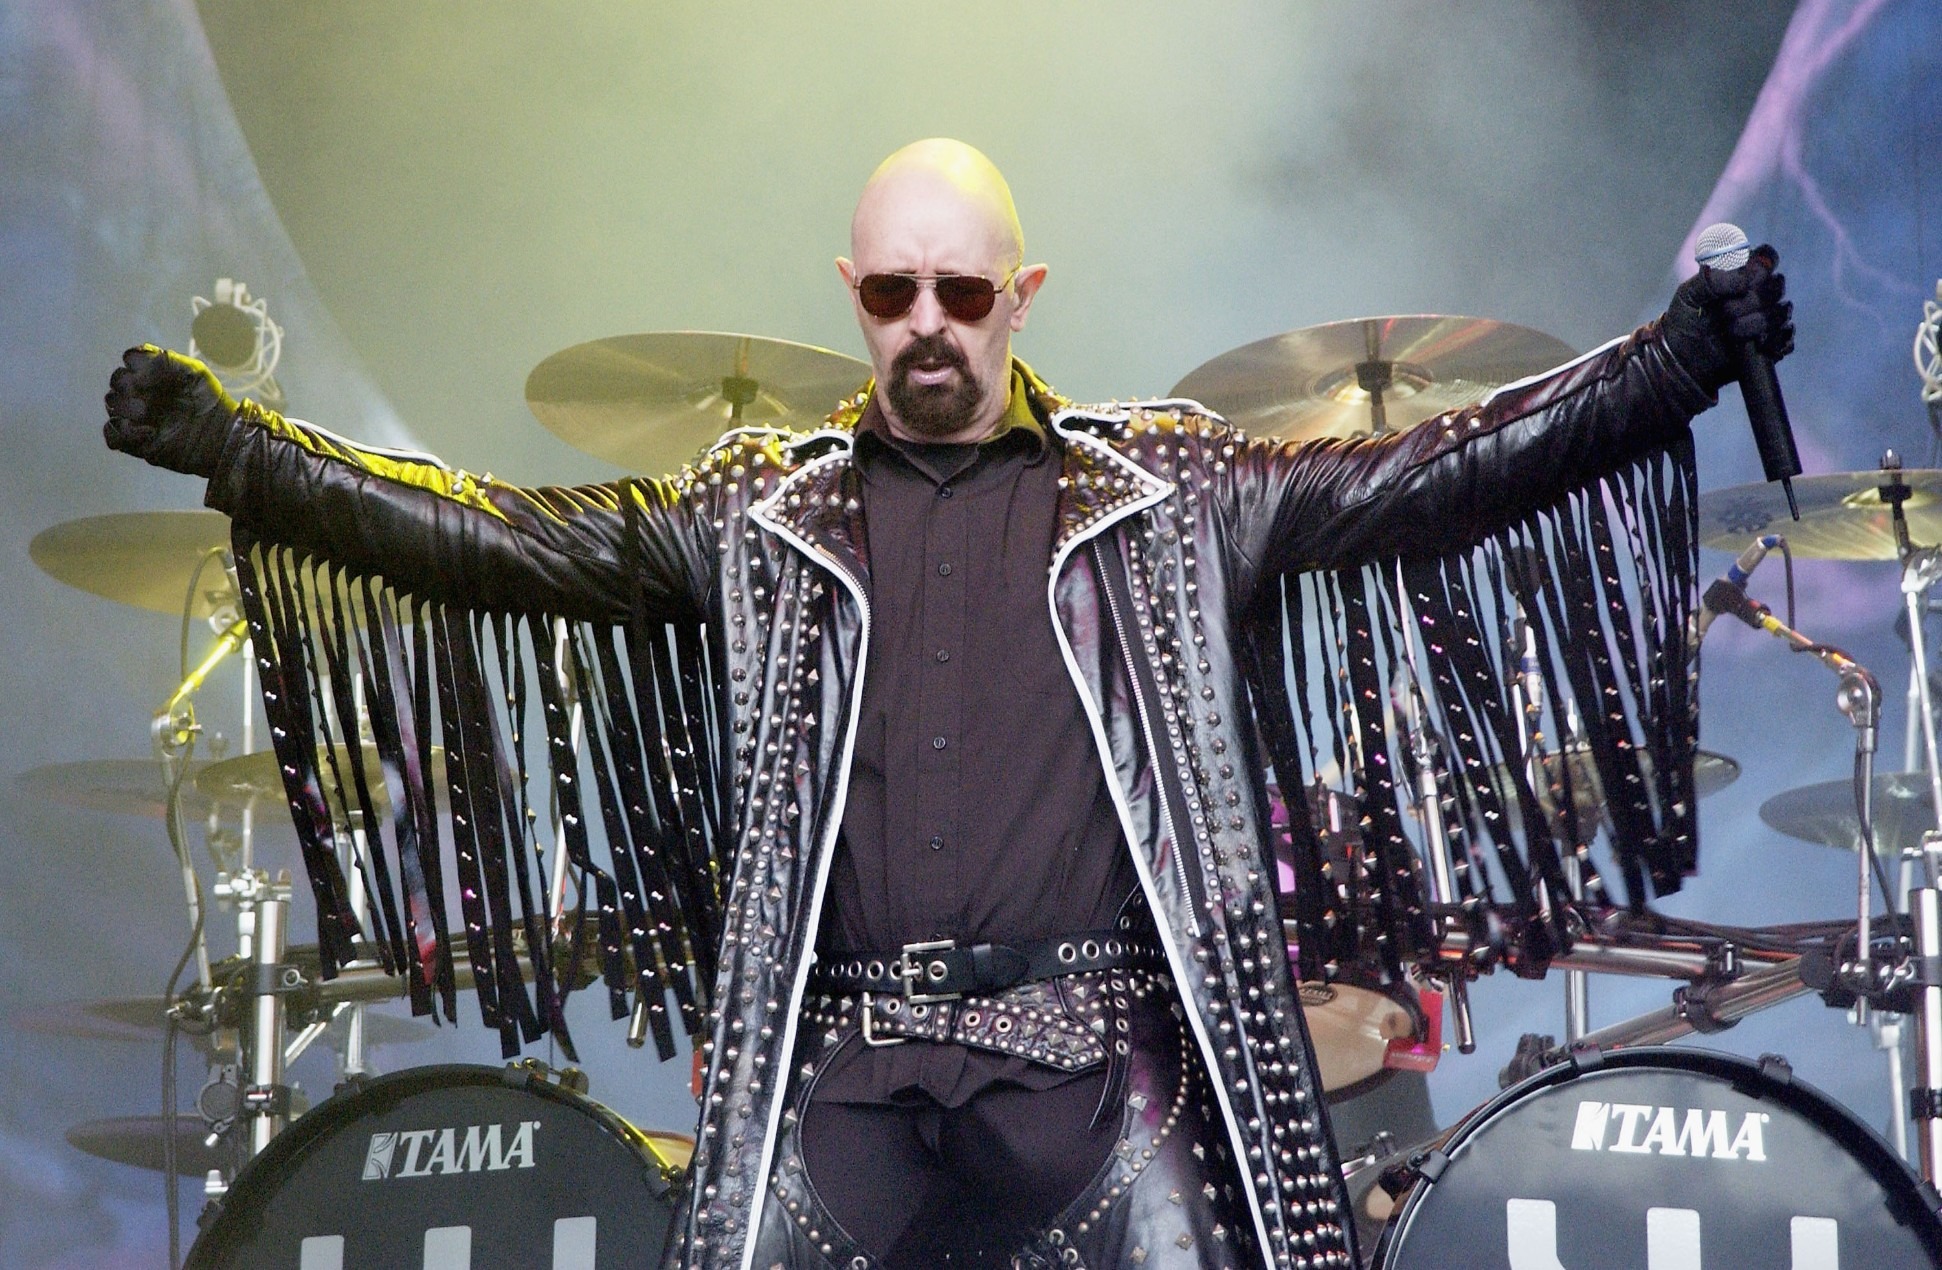 Judas Priest’s Rob Halford on his brutally honest autobiography – and encouraging a dialogue around abuse